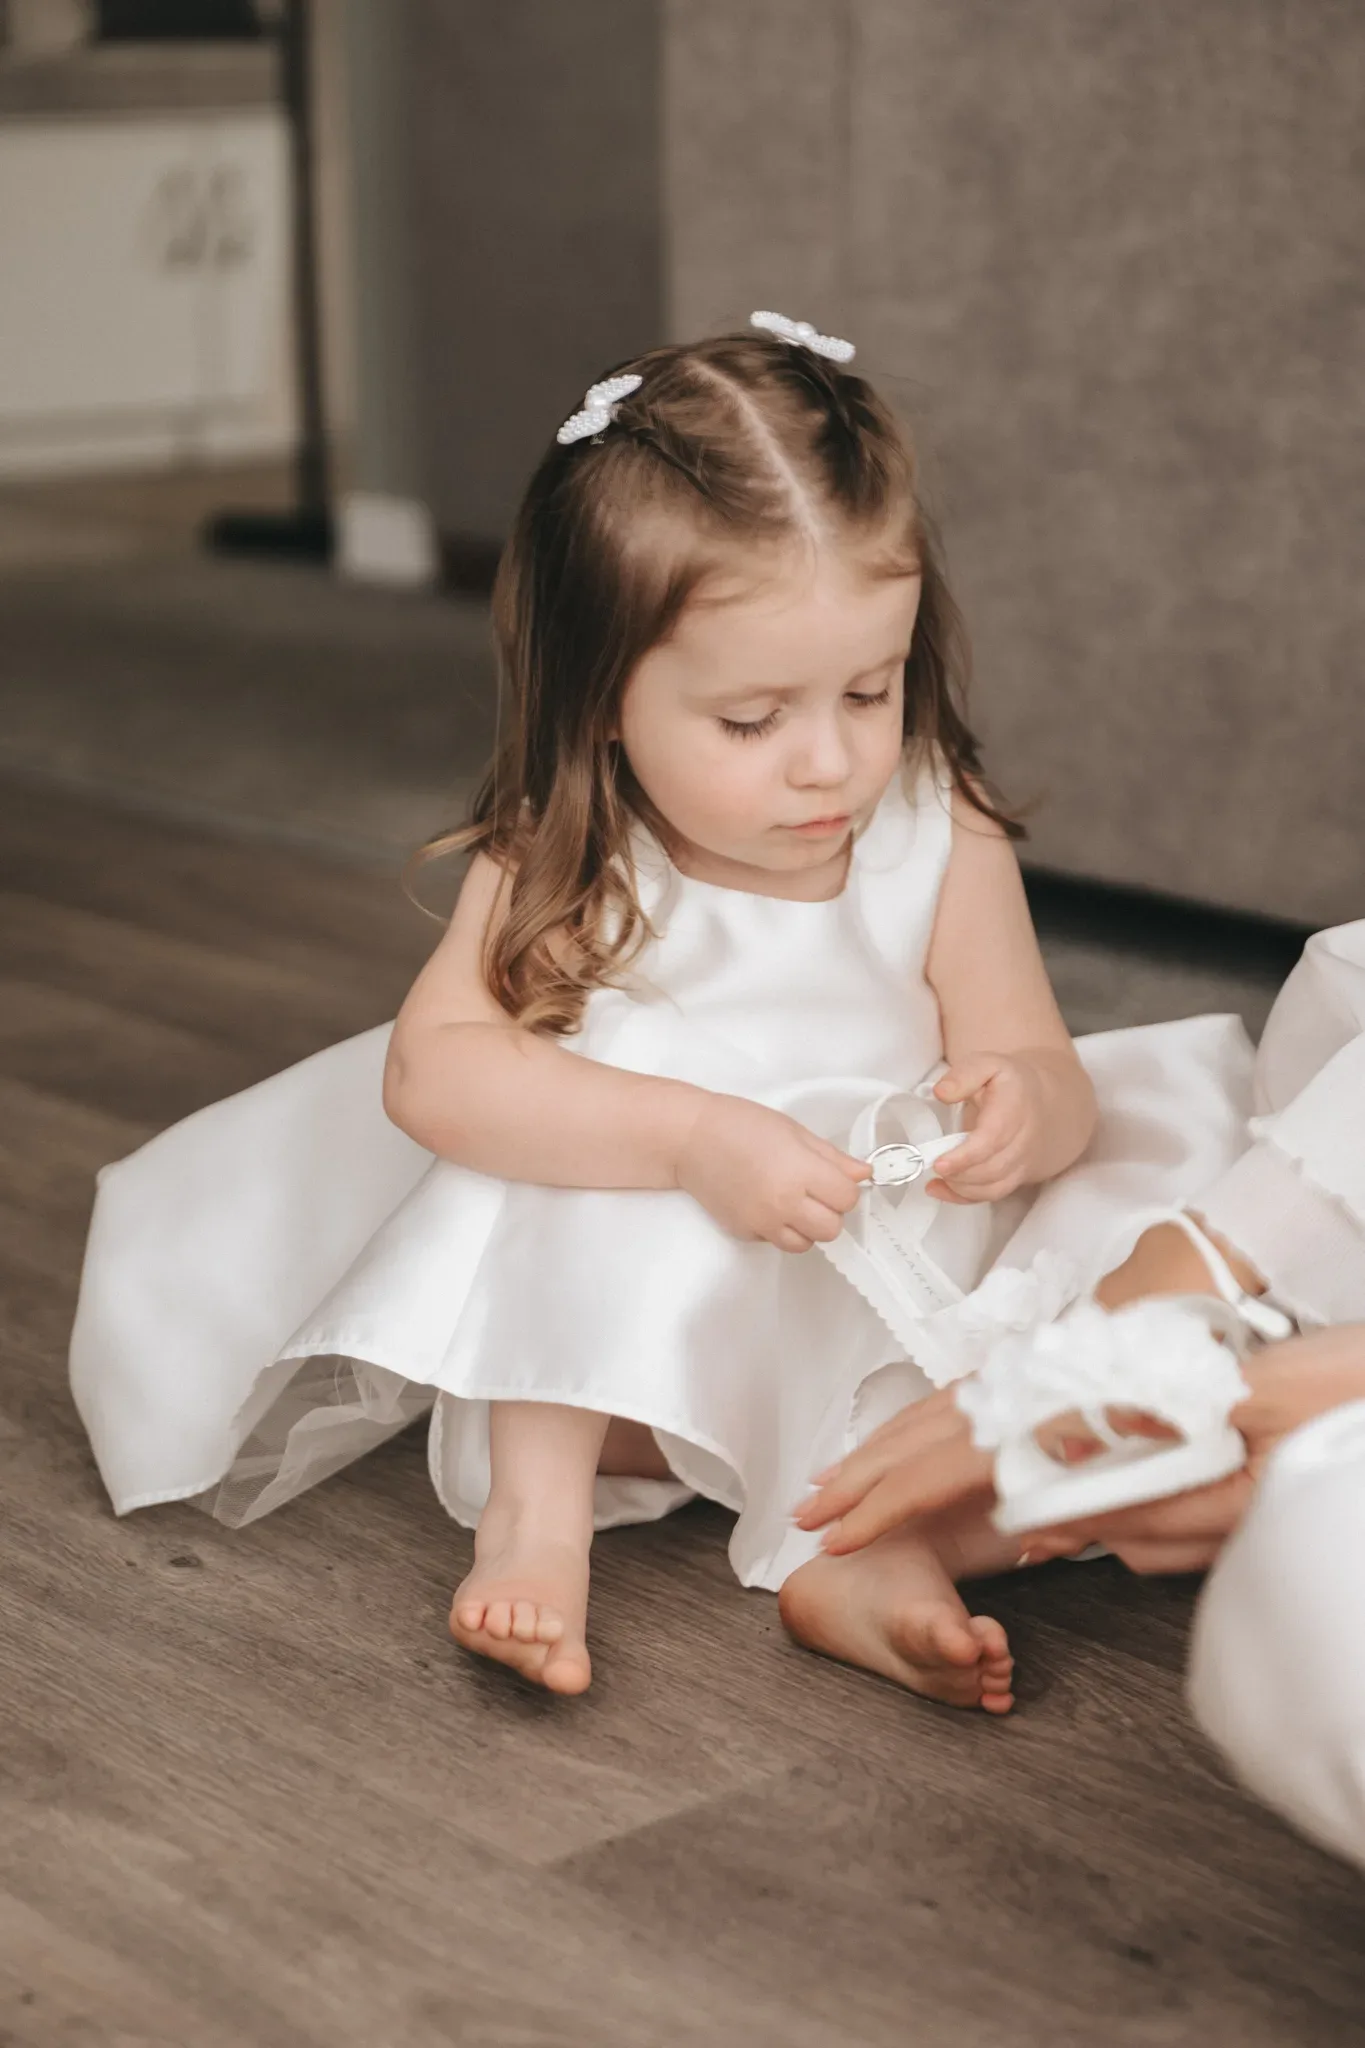 A young girl in a white satin dress with delicate hair bands sits on a wooden floor, intently fastening a white ribbon on a woman's shoe, who is cropped at the knees.